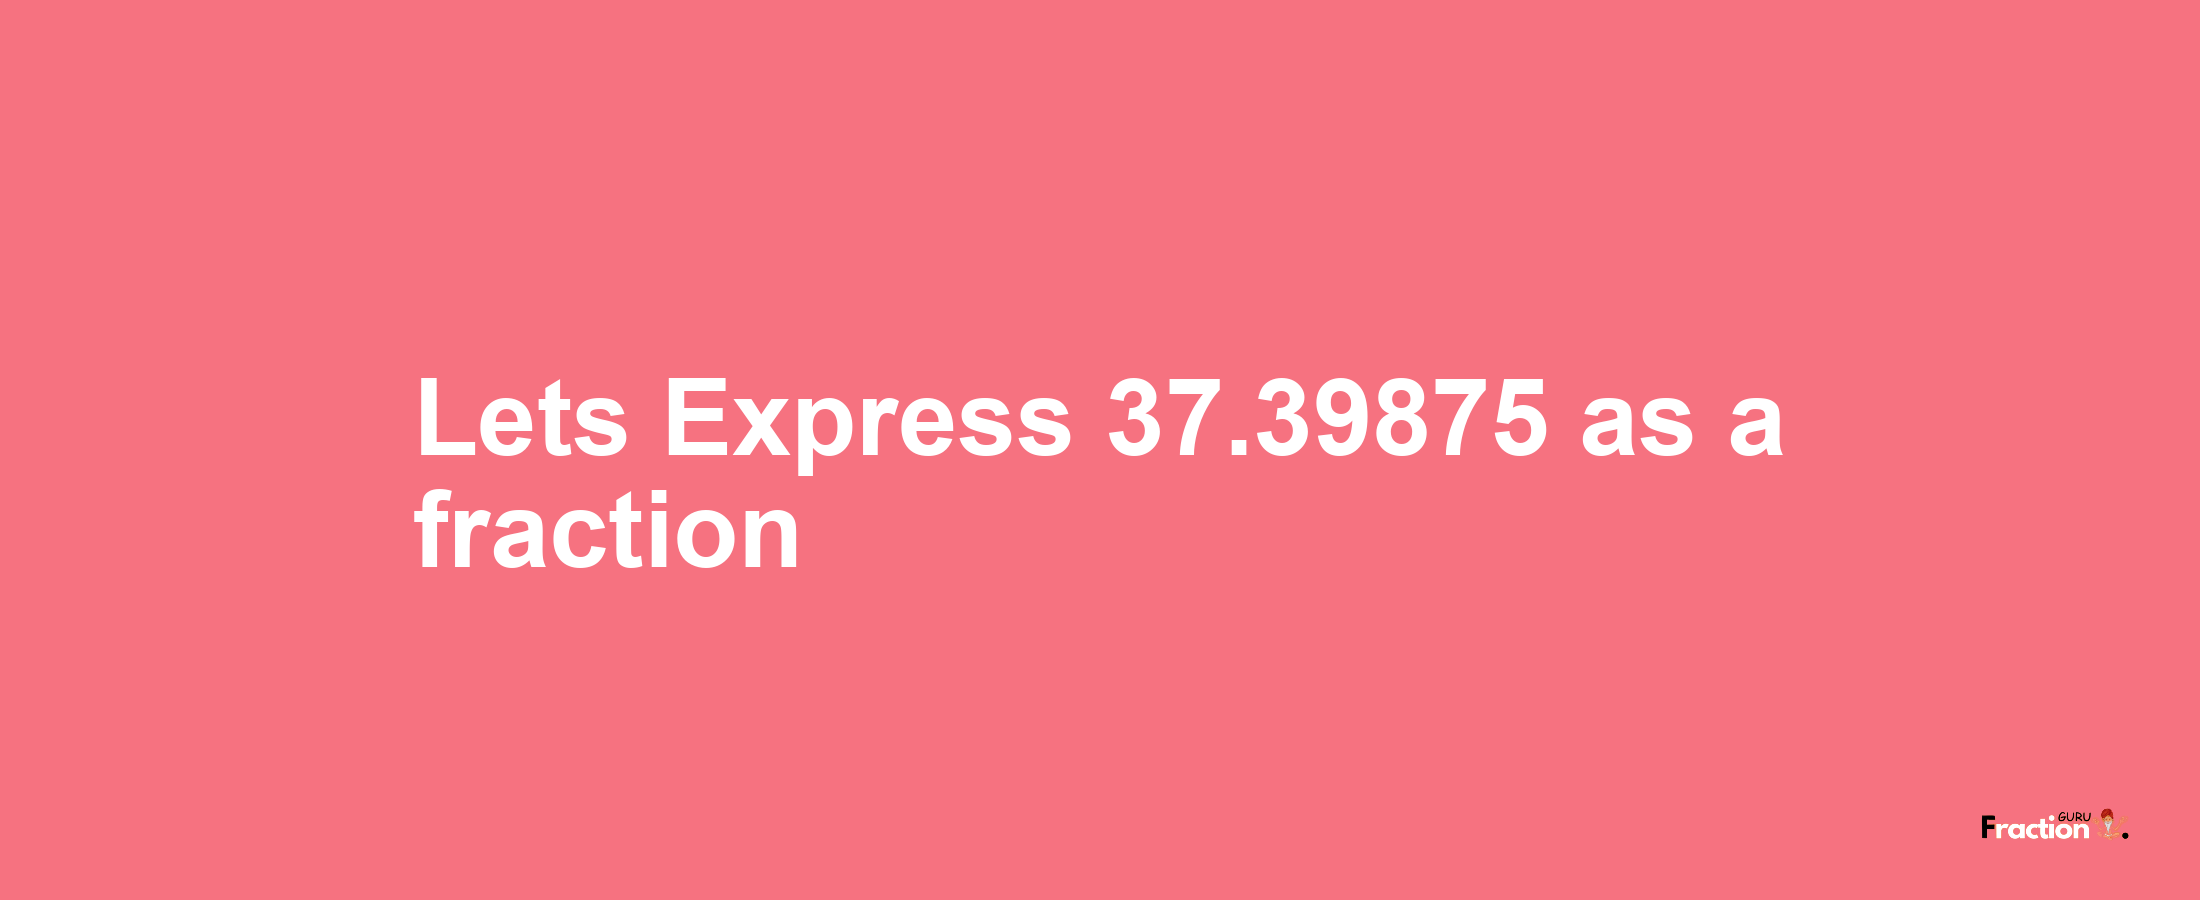 Lets Express 37.39875 as afraction